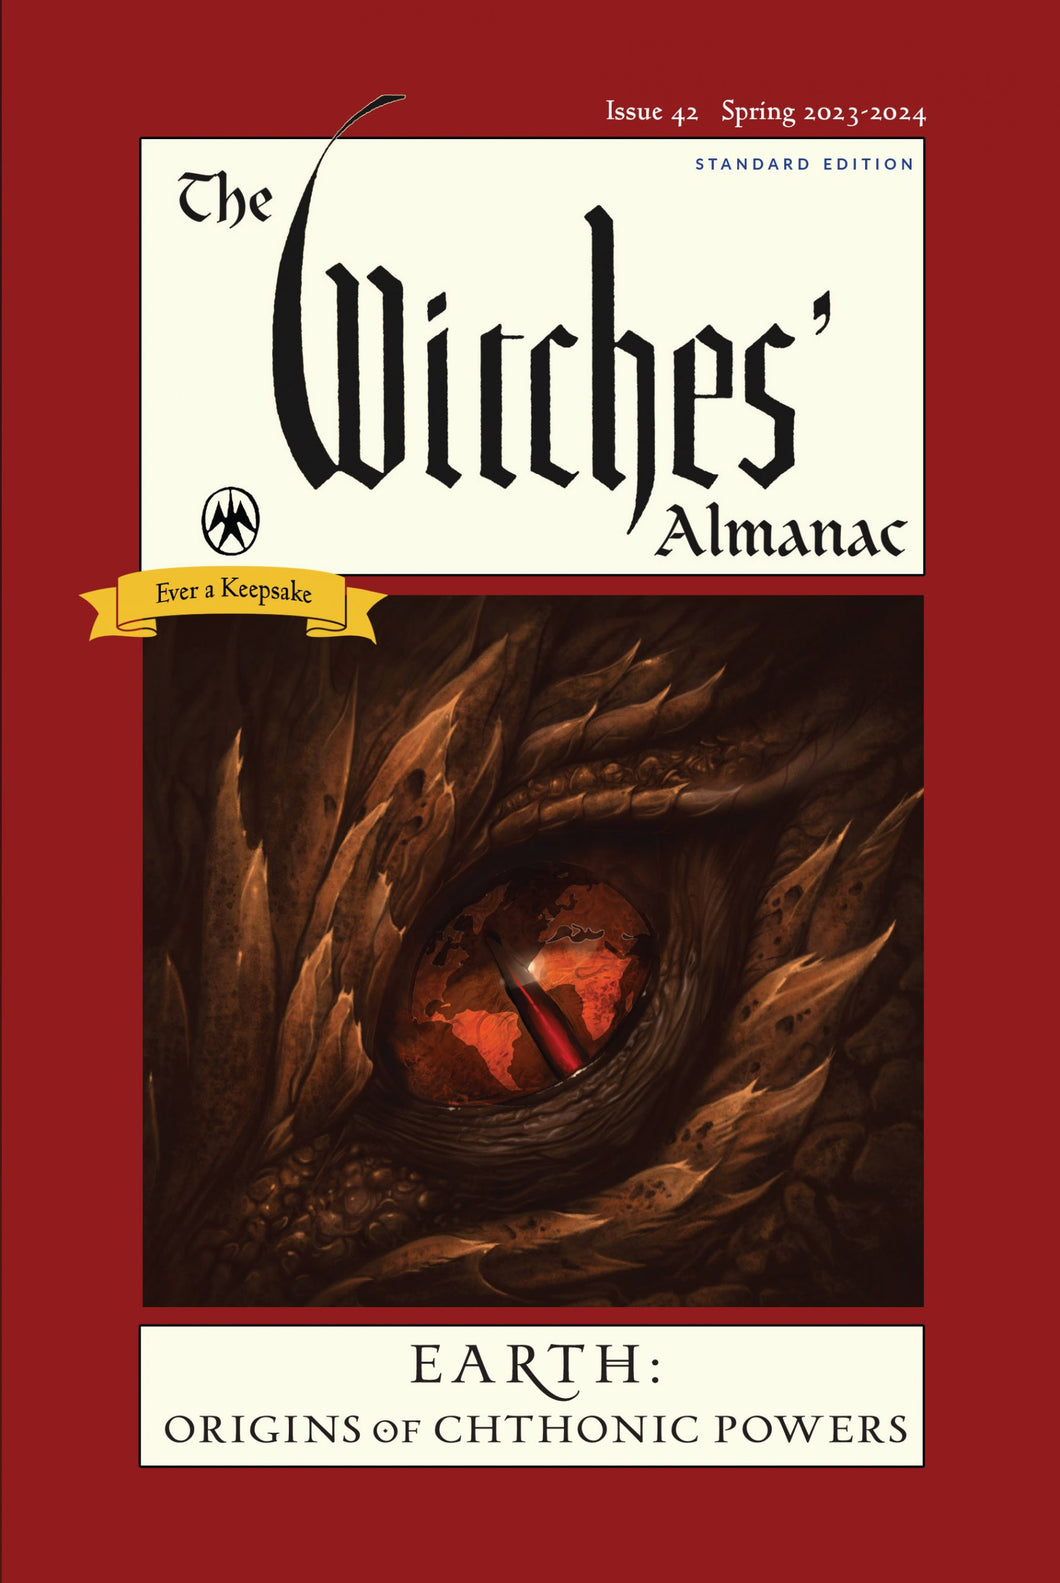 The Witches Almanac 2023-2024